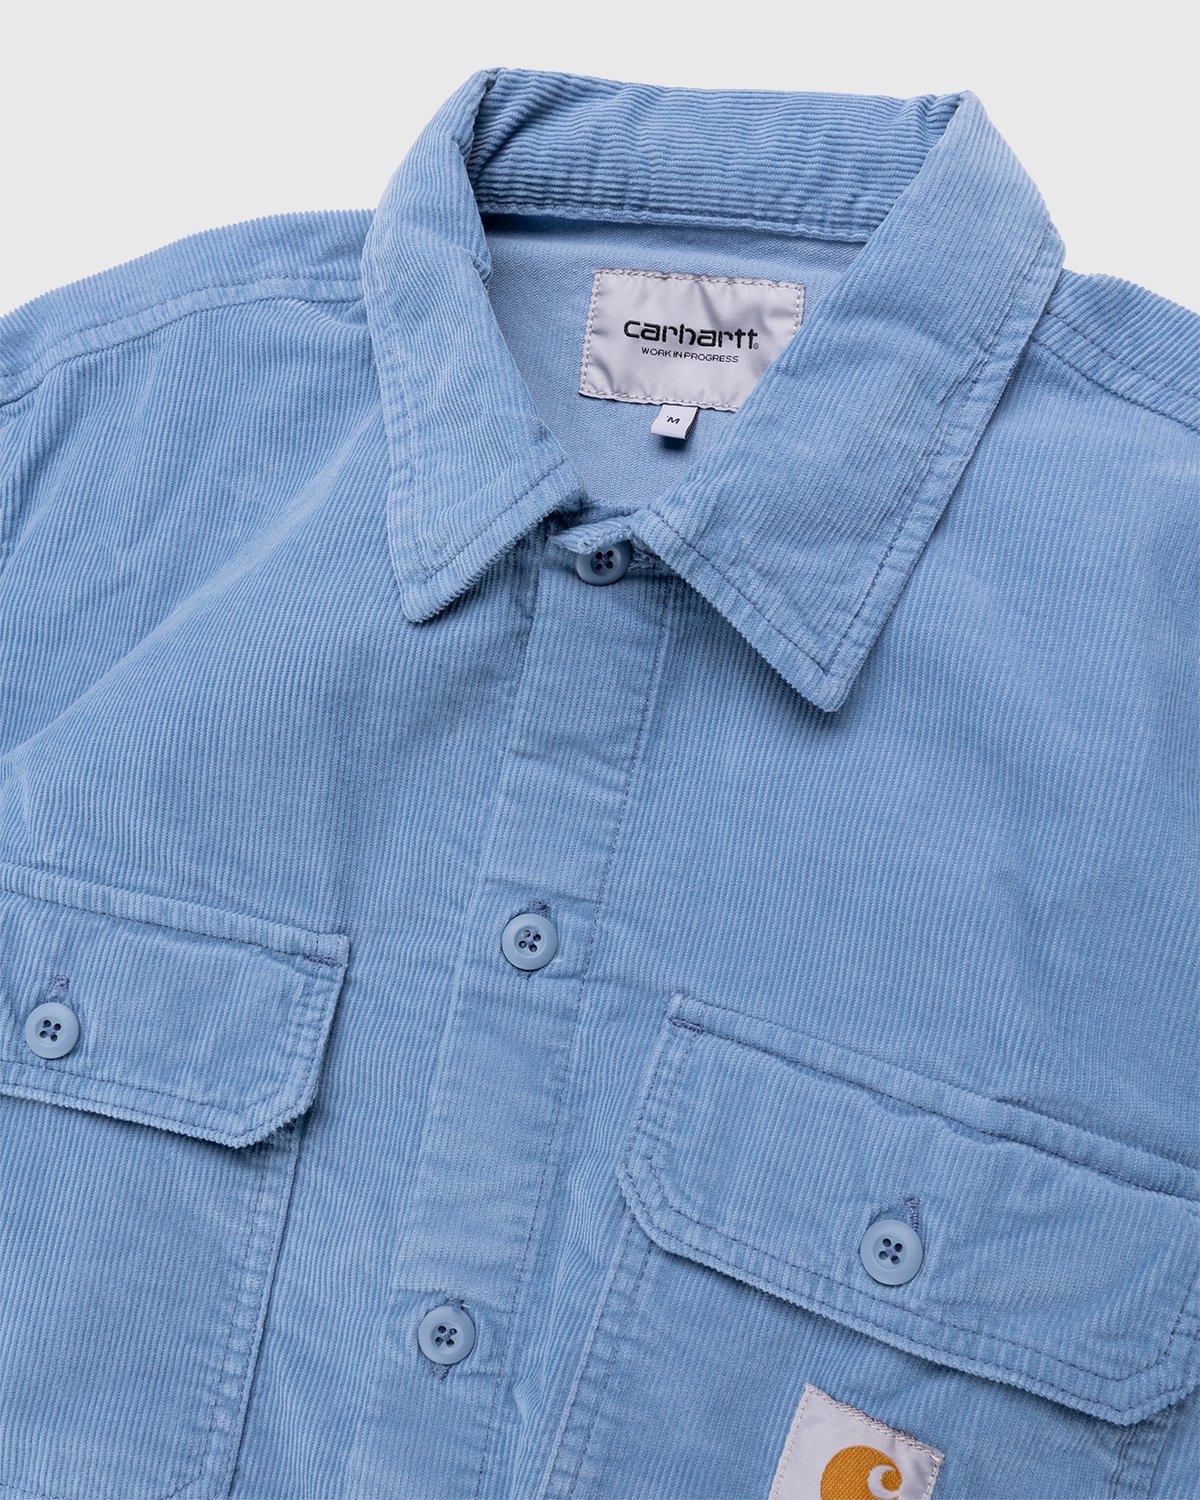 Carhartt WIP - Dixon Shirt Jacket Icy Water Rinsed - Clothing - Blue - Image 3